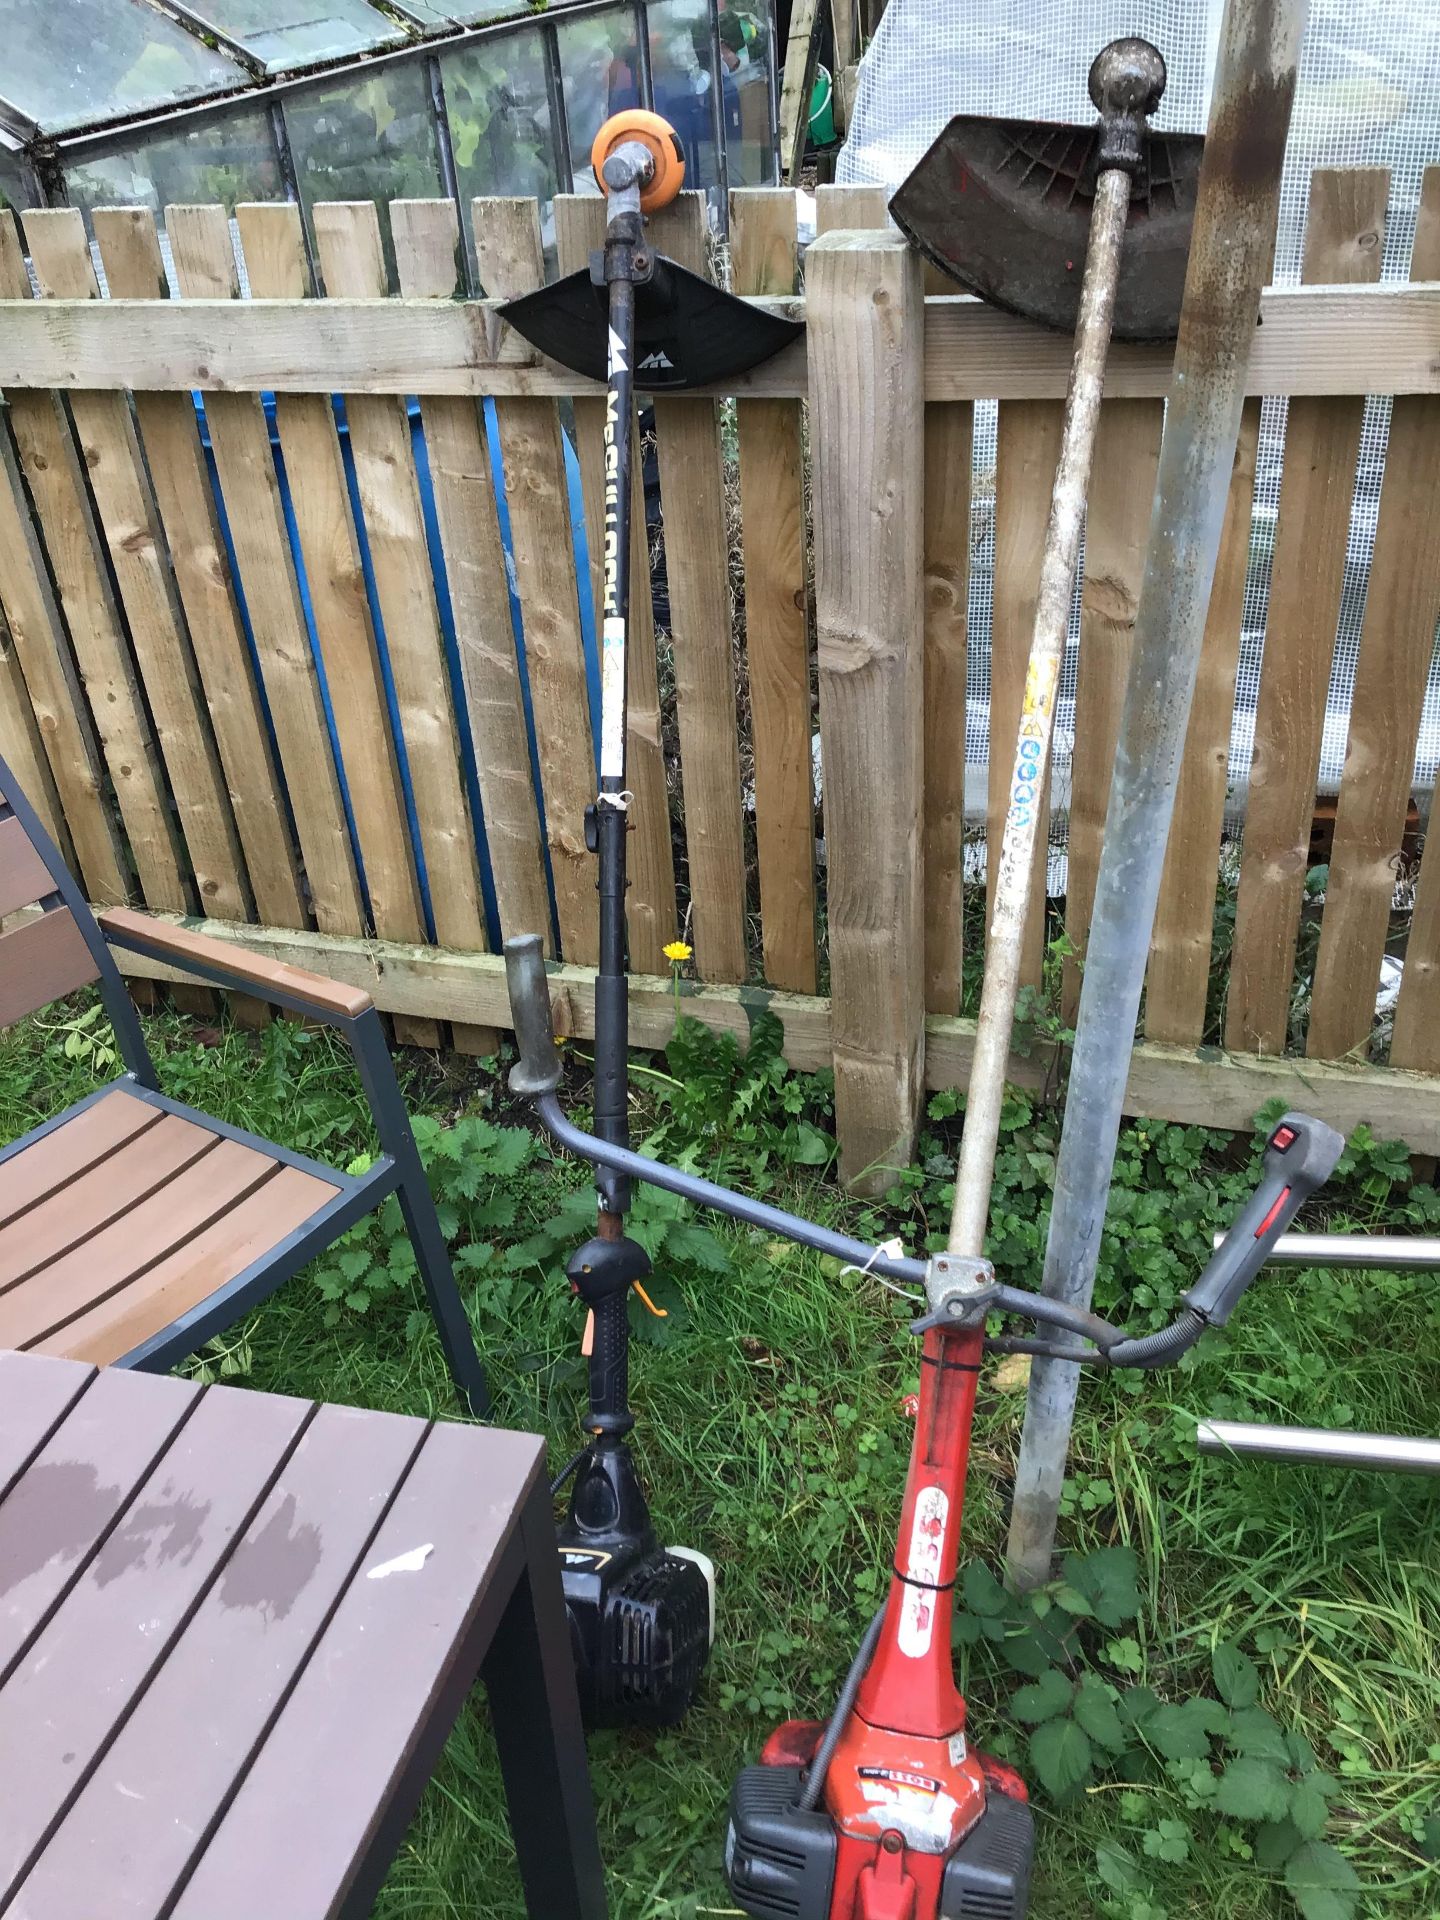 2x petrol strimmers Macullock and Bosch